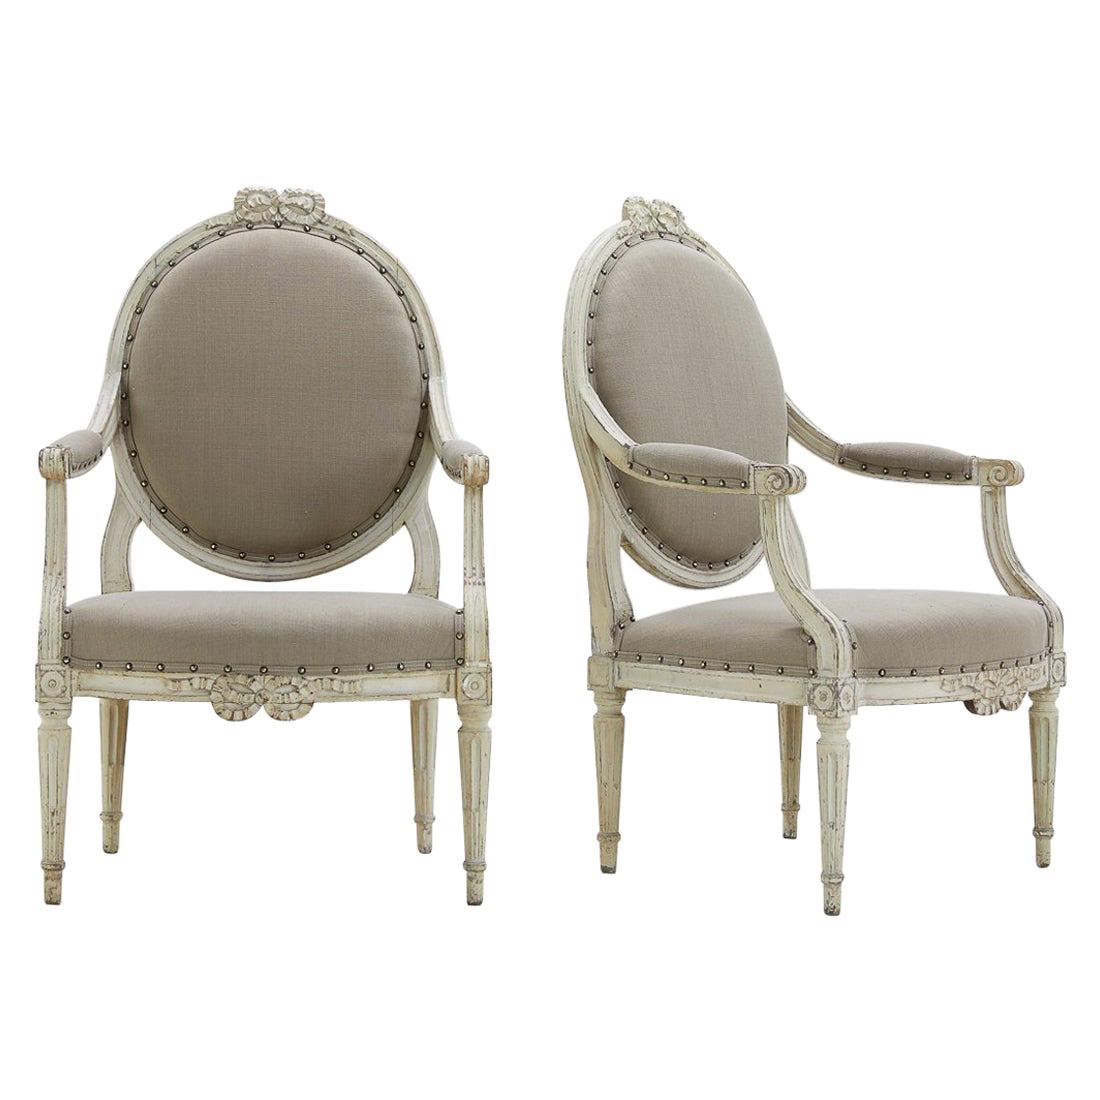 Pair of 18th Century French Painted Chairs For Sale